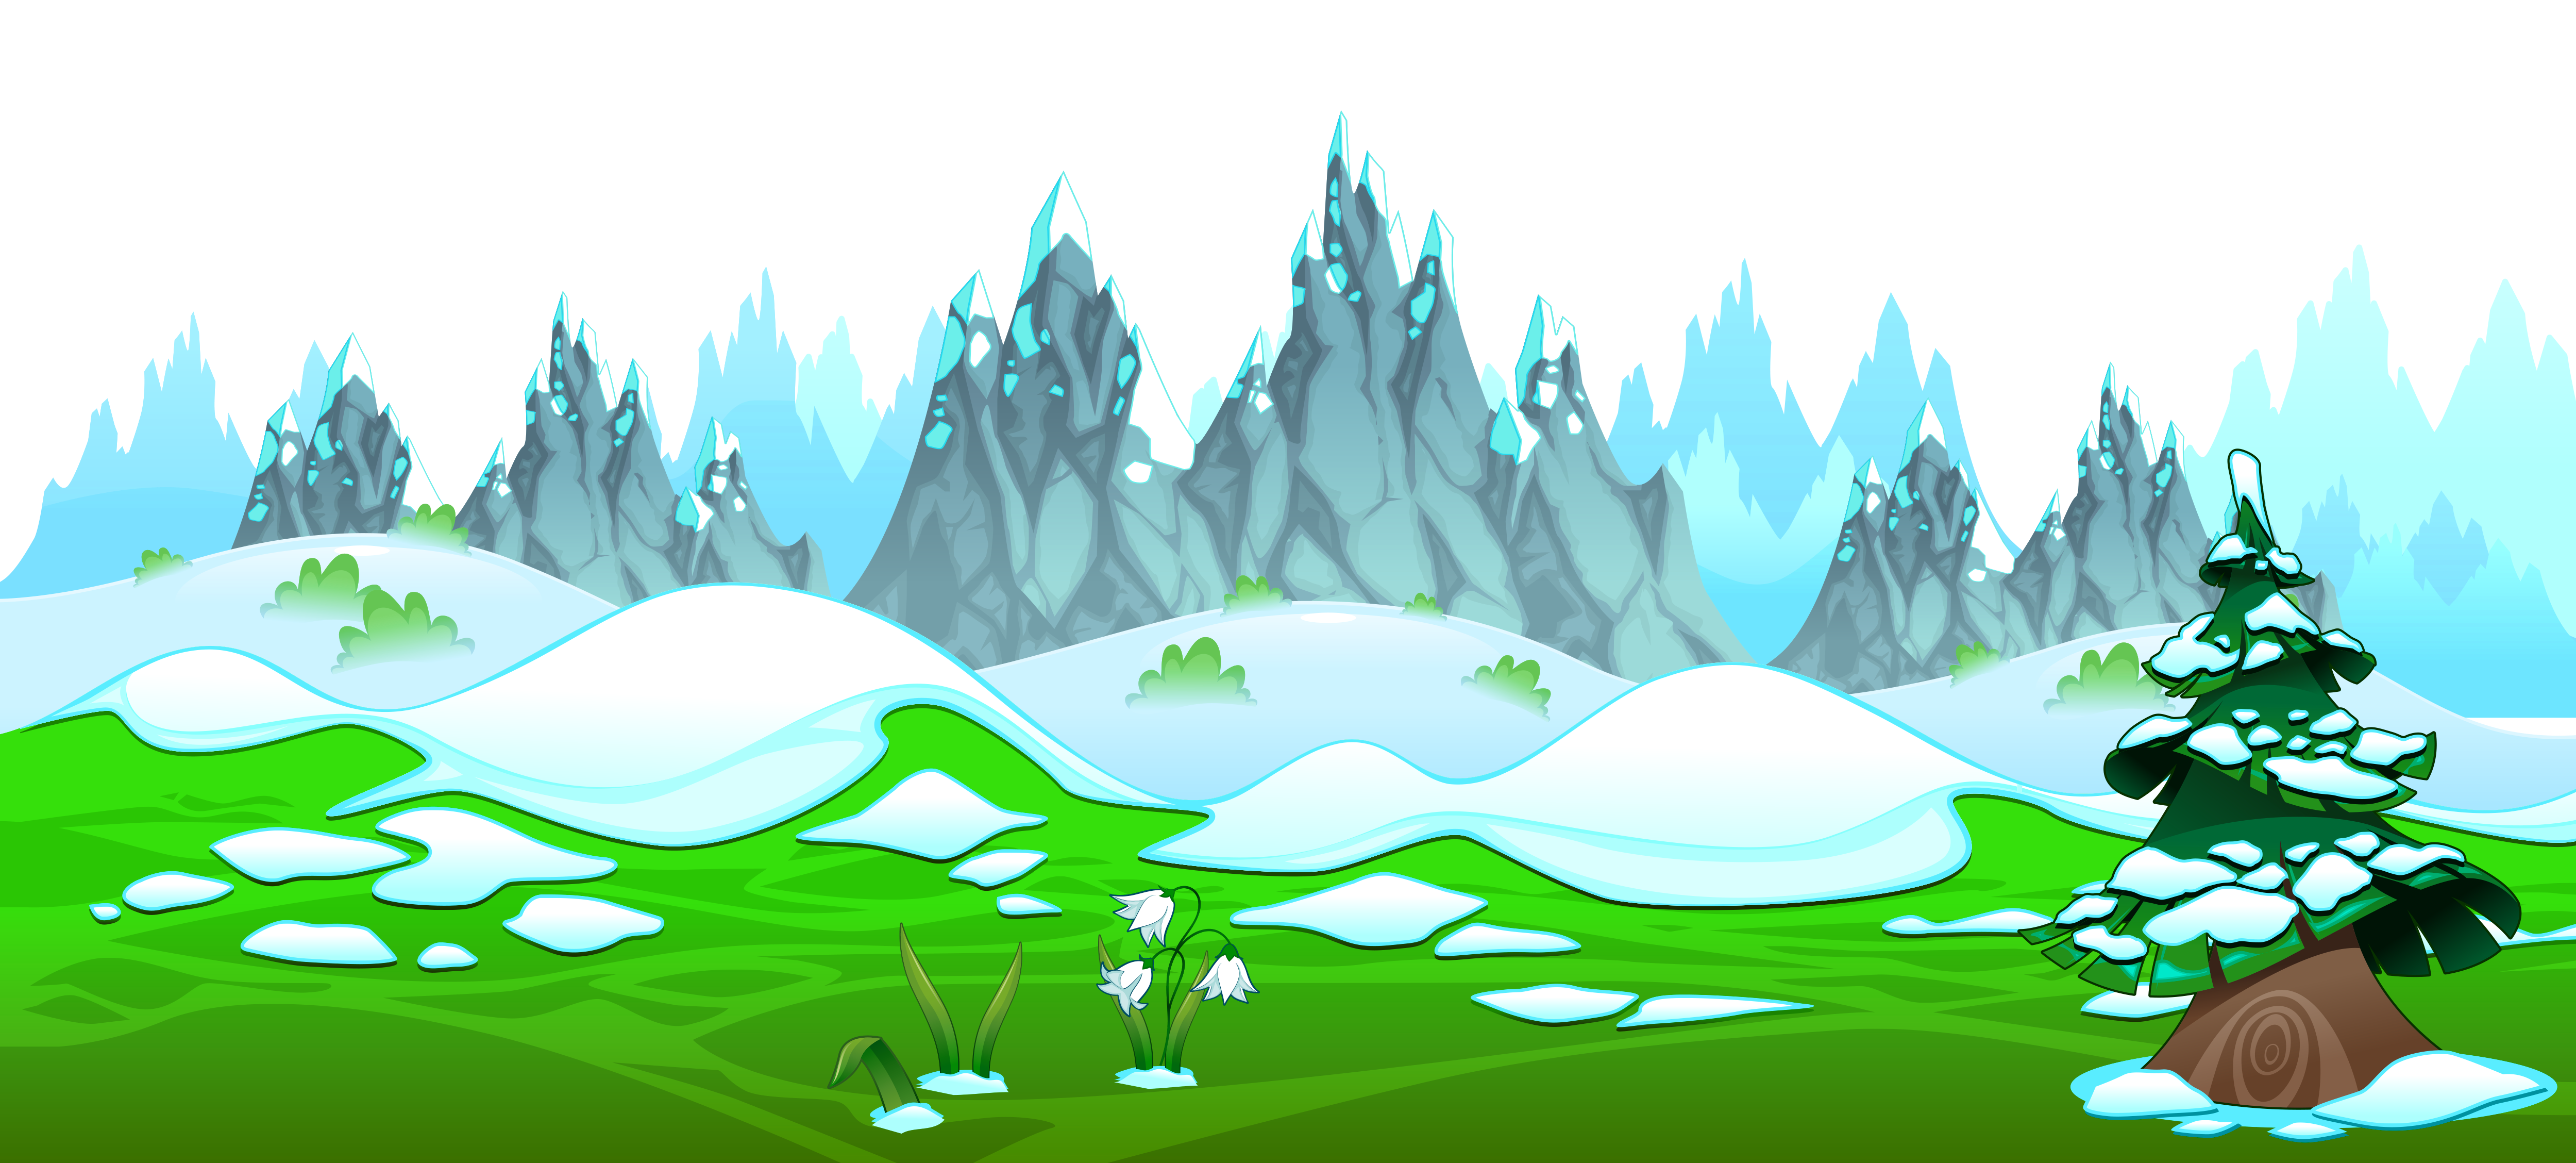 Mountains mountain clip art free download clipart images 2.